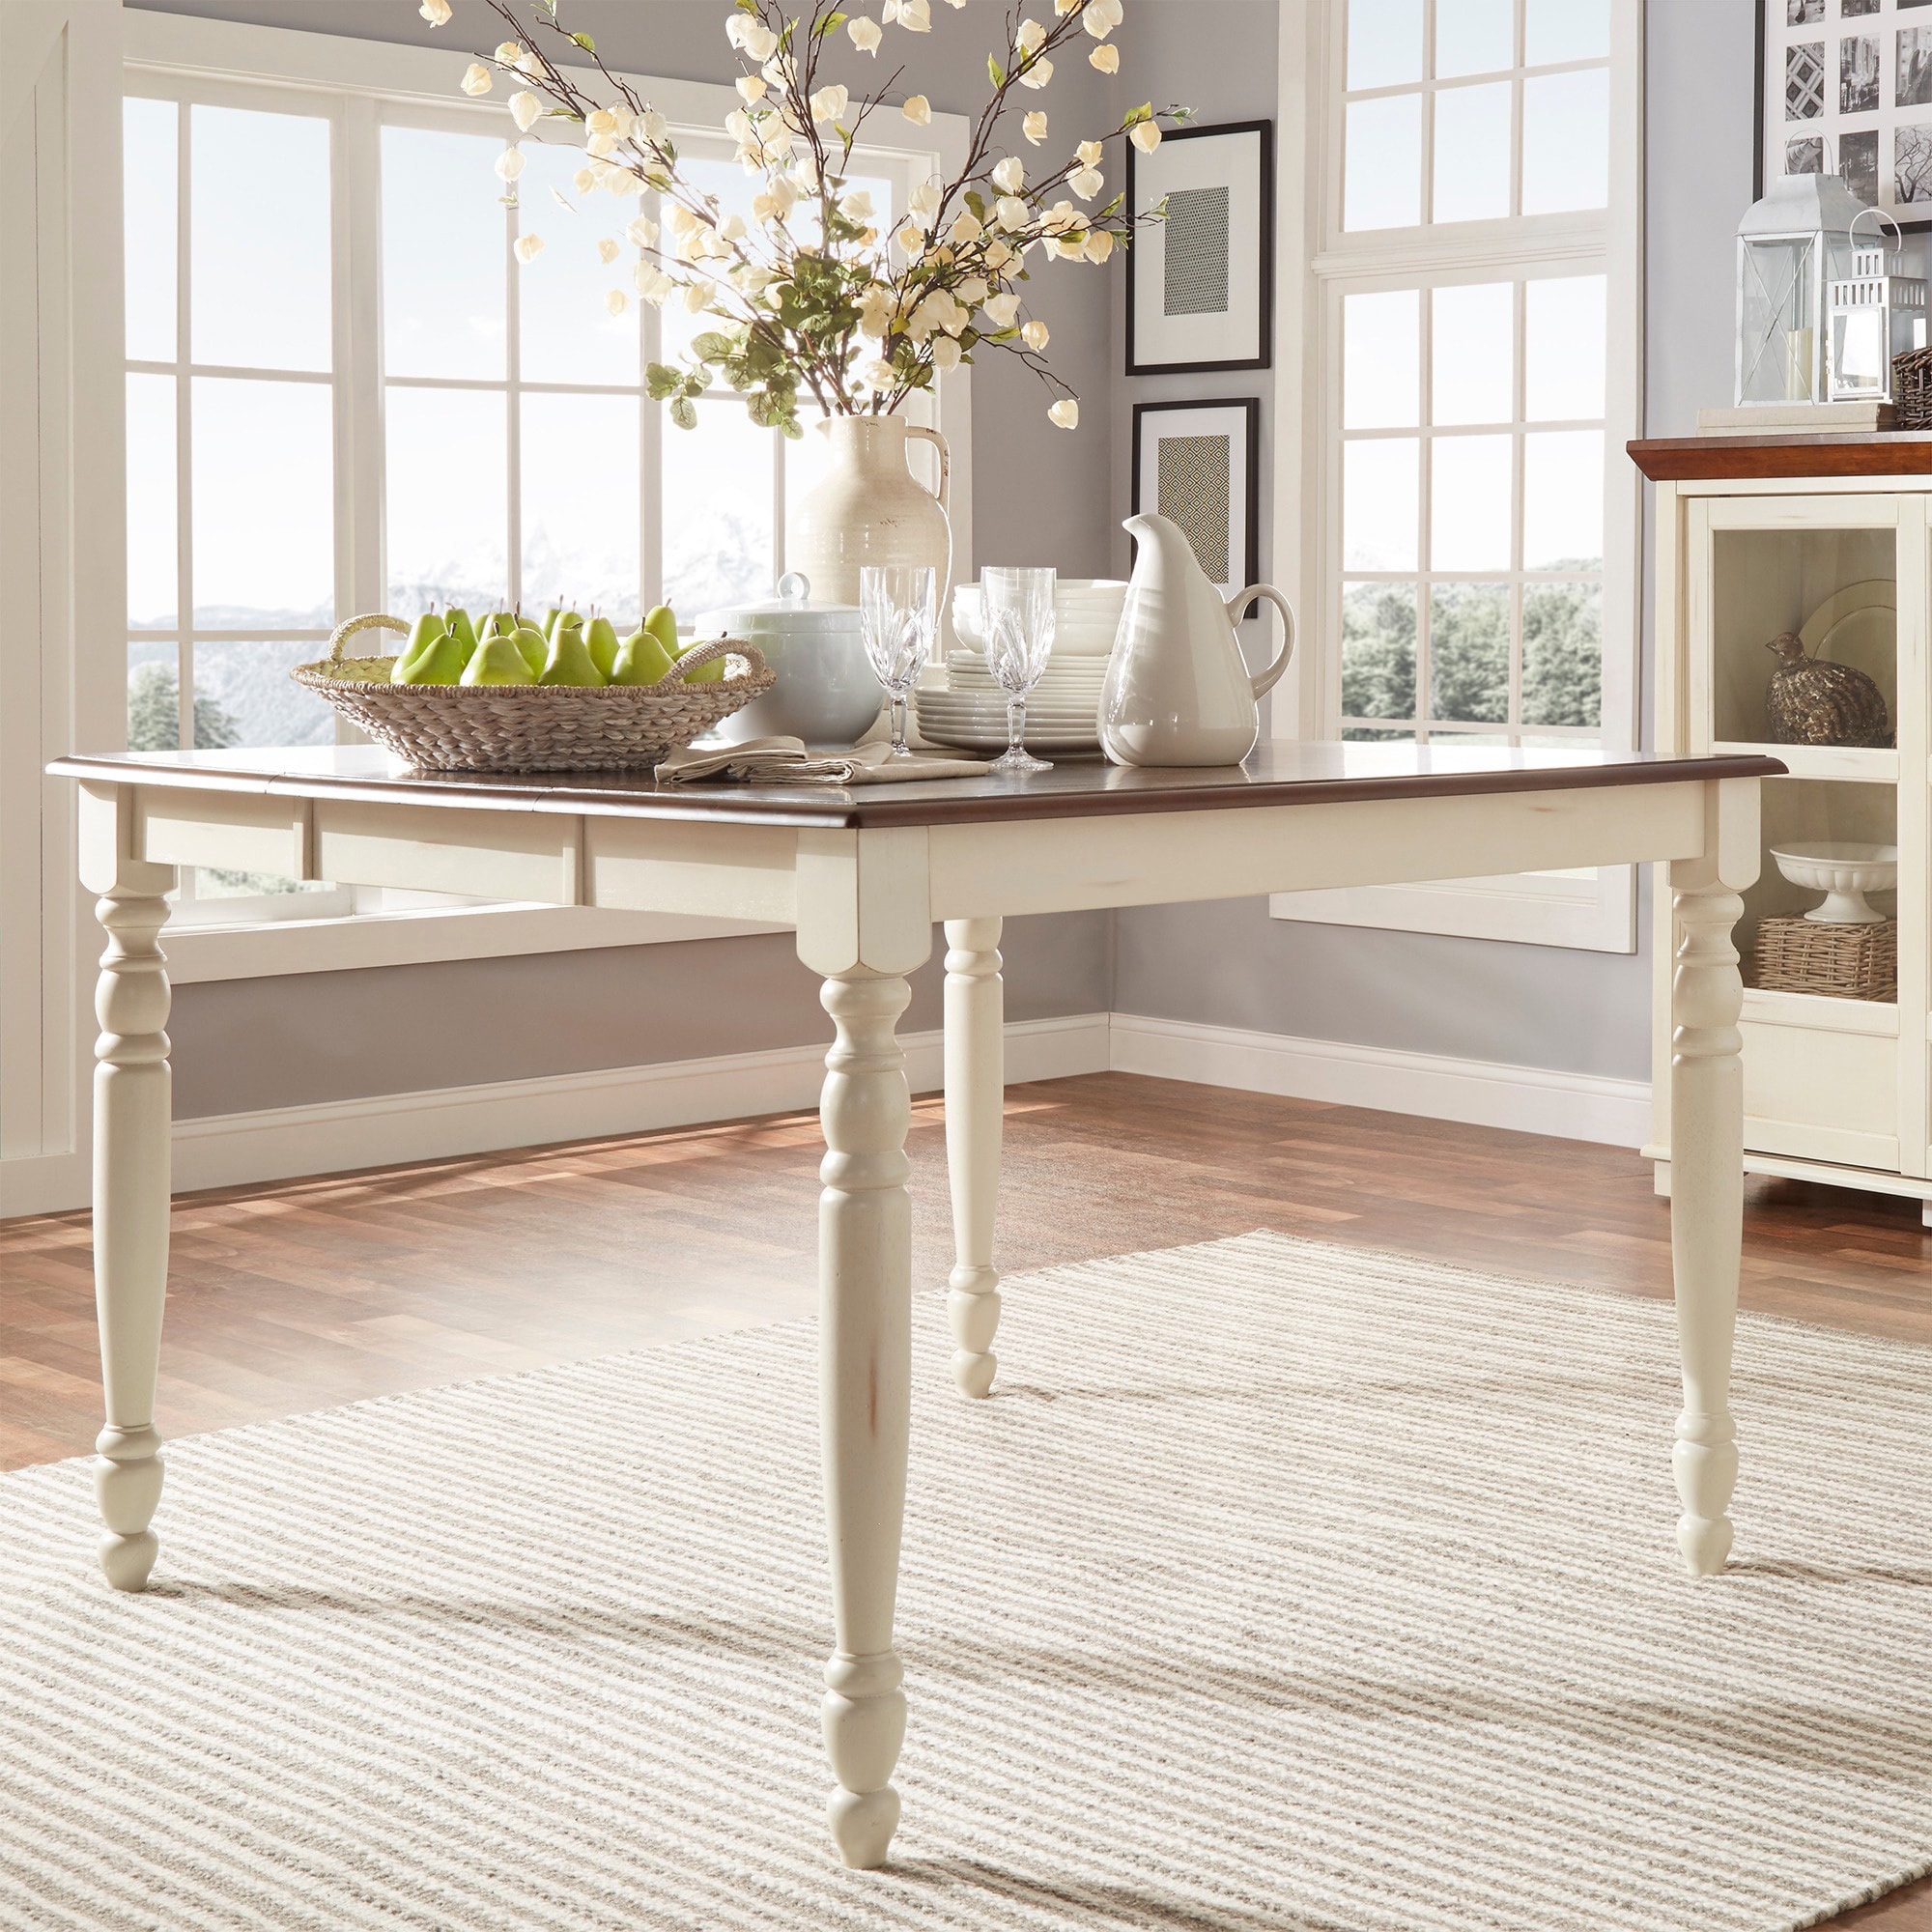 Mackenzie Country Counter Height Extending Dining Table By Inspire Q Classic Dining Table Overstock 9366808